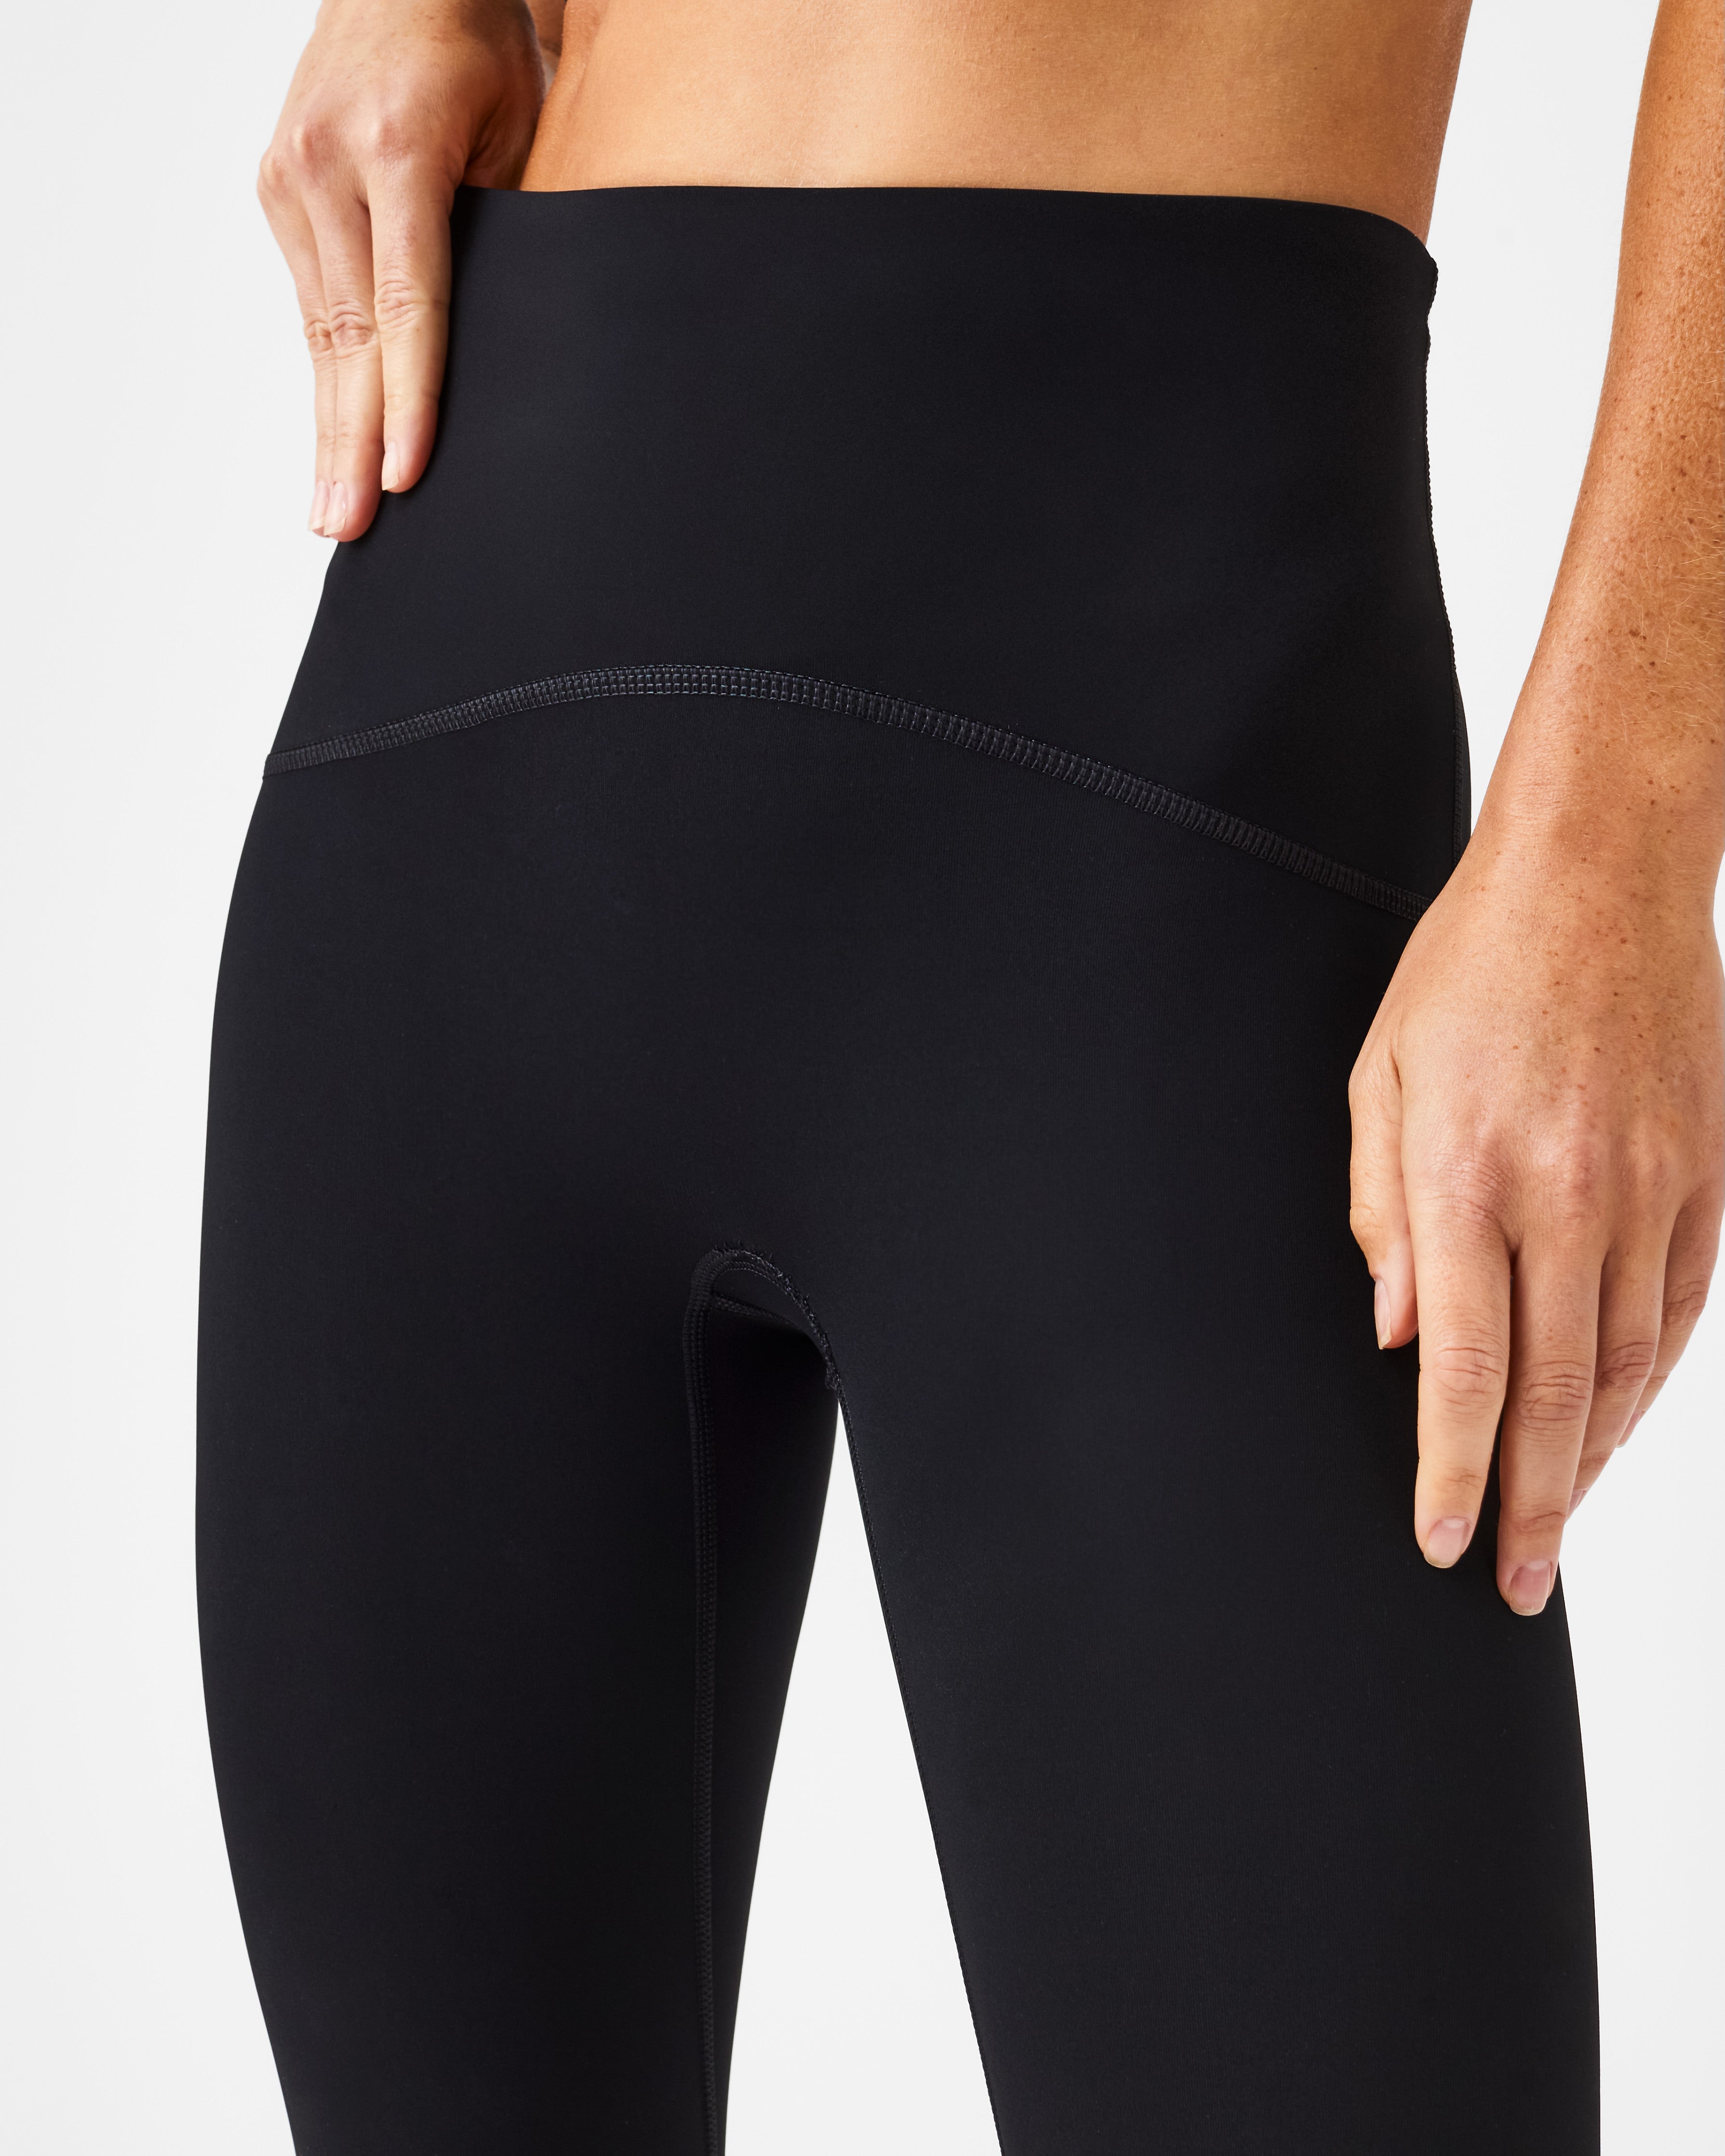 Spanx has launched a 'booty boost' gym wear range and it's available in  Ireland - HerFamily